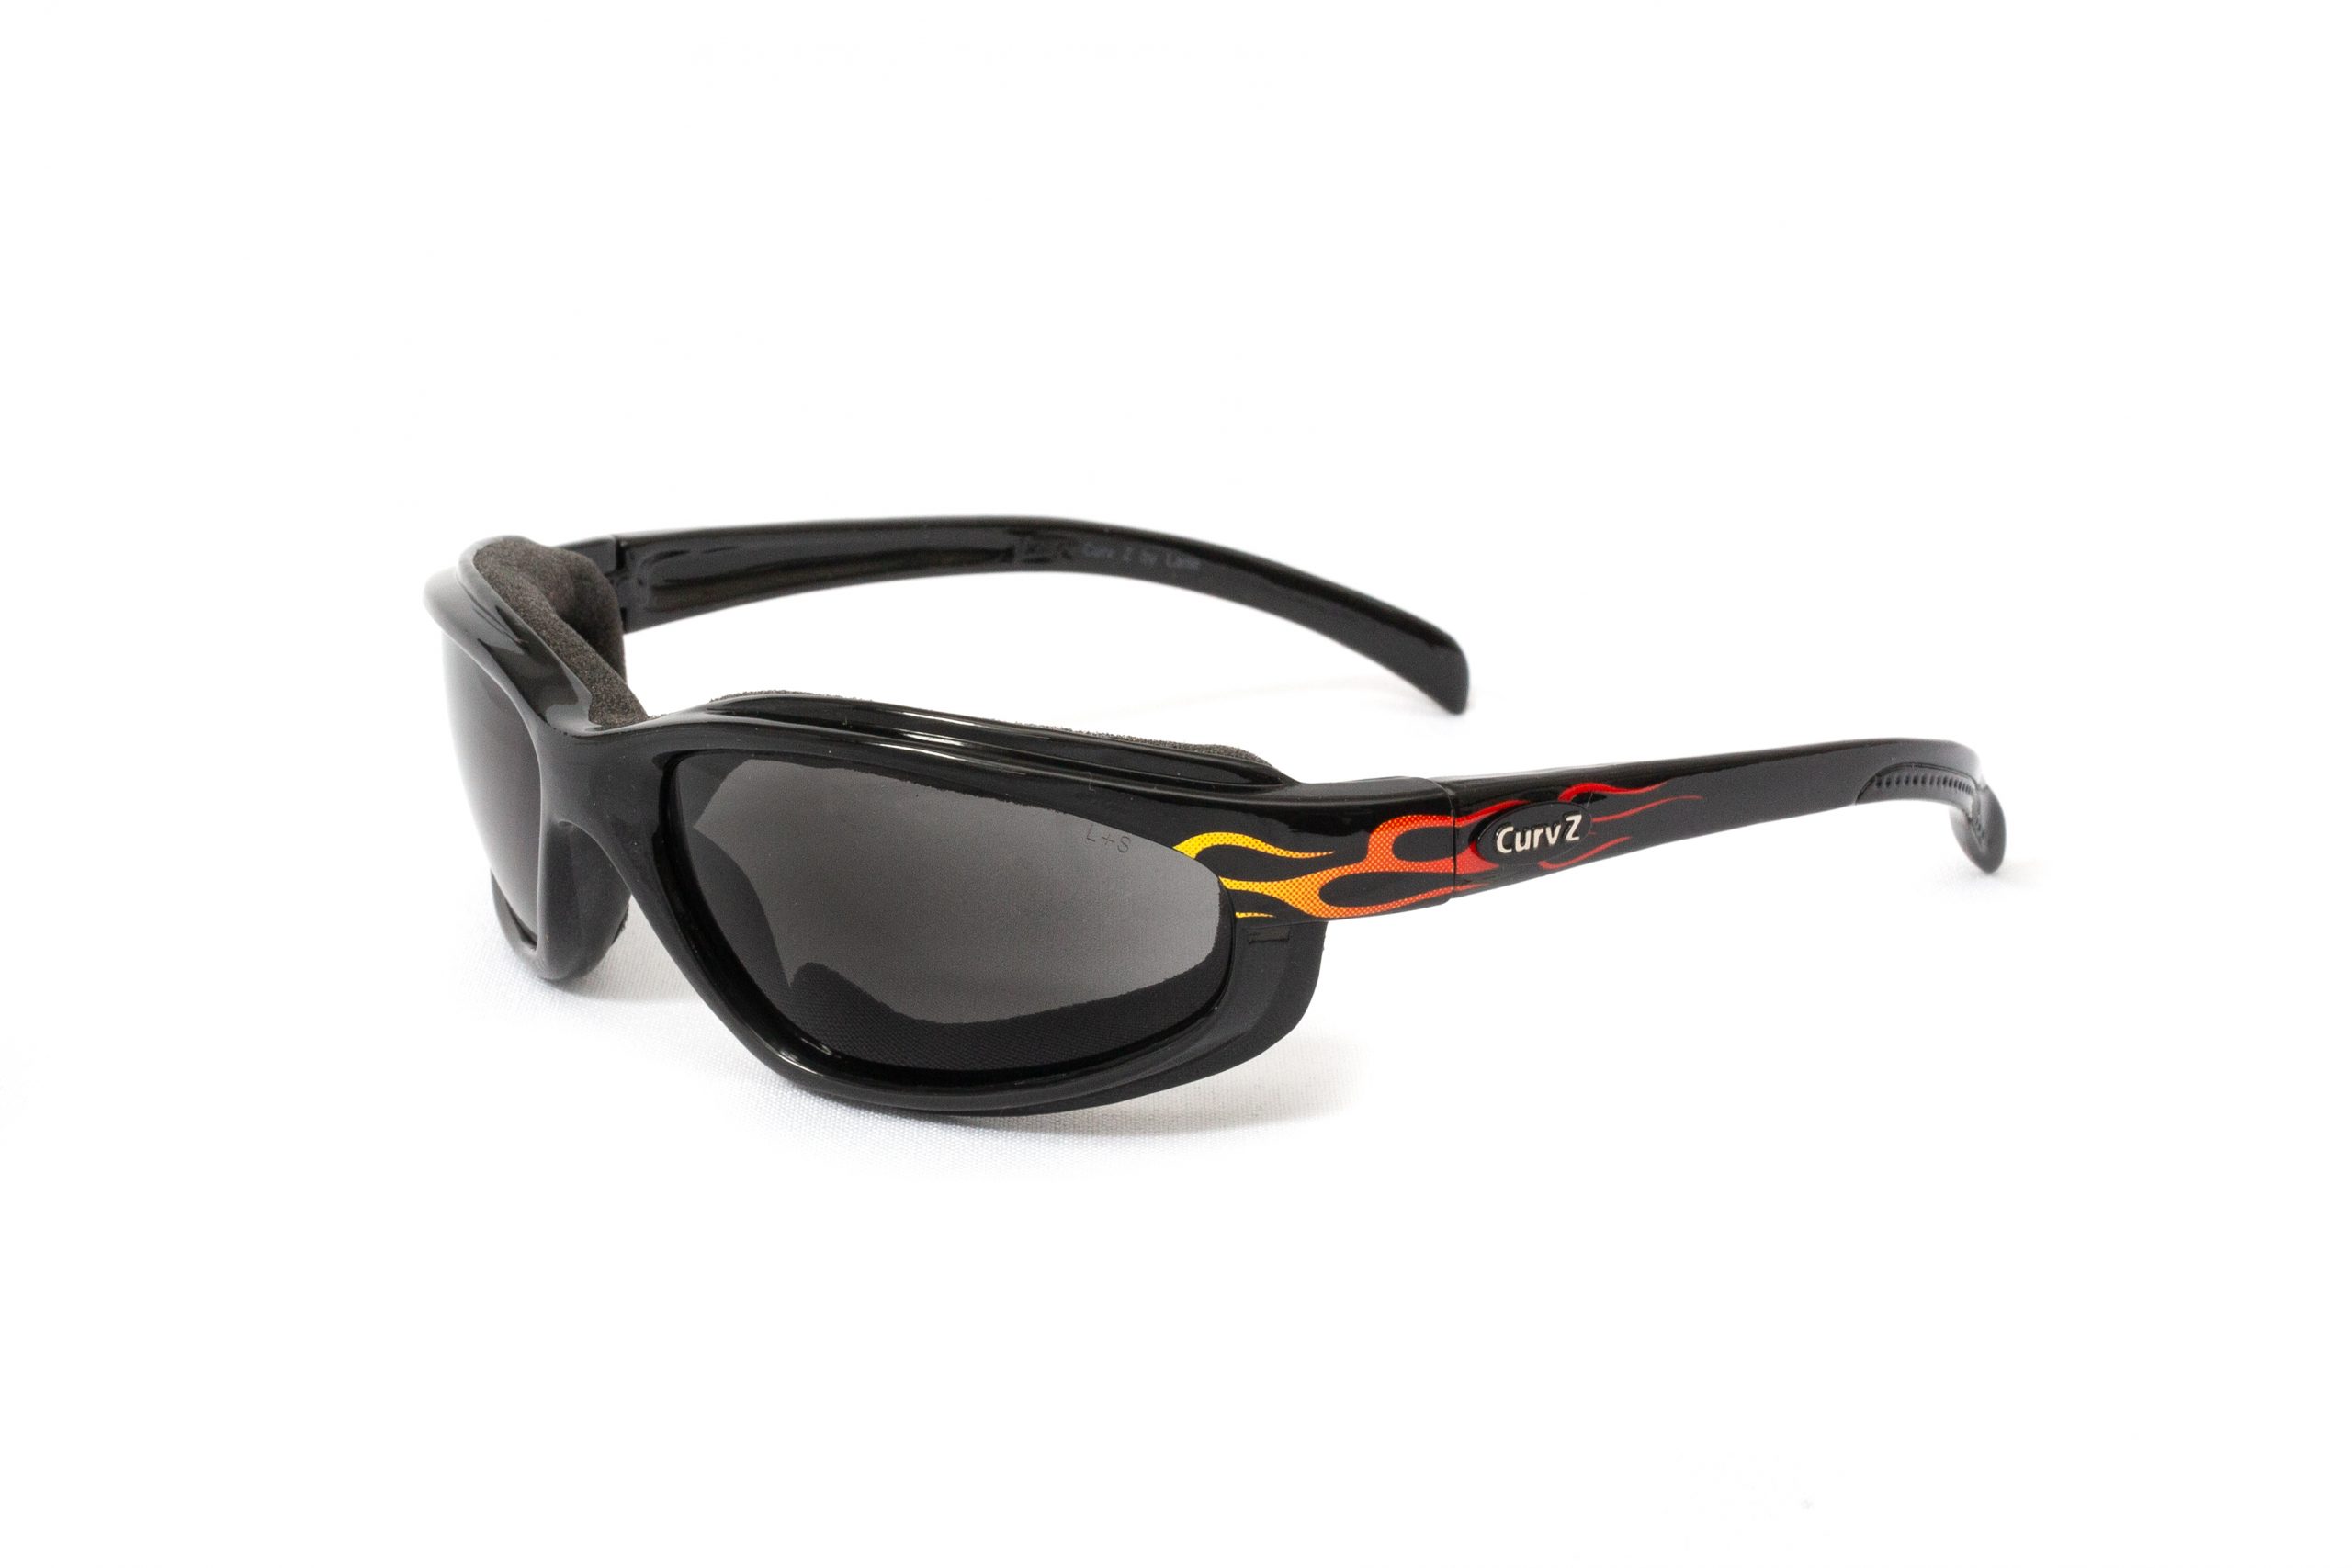 02-07G - CurvZ Glossy Flame Sunglasses with Smoke Lenses and Glossy Black Frame